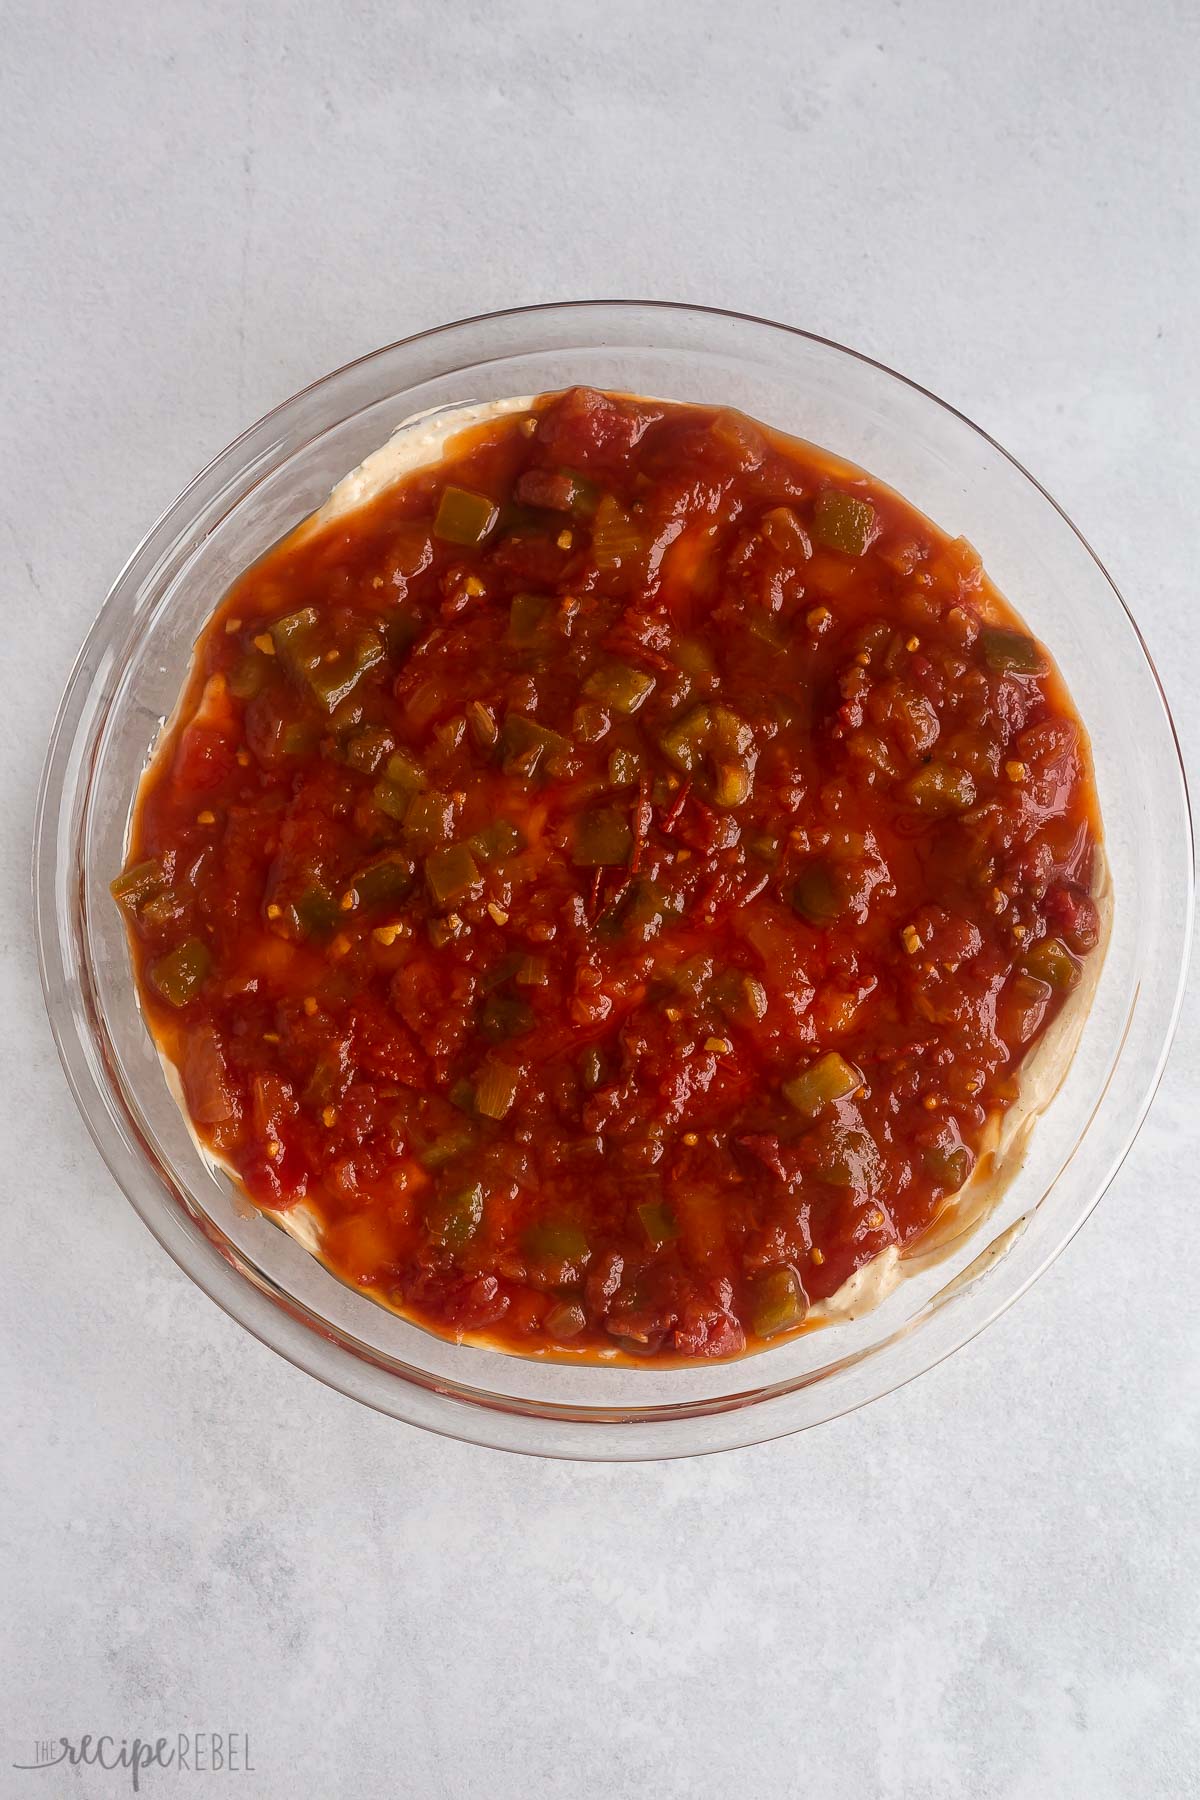 salsa spread on top of cream cheese mixture.